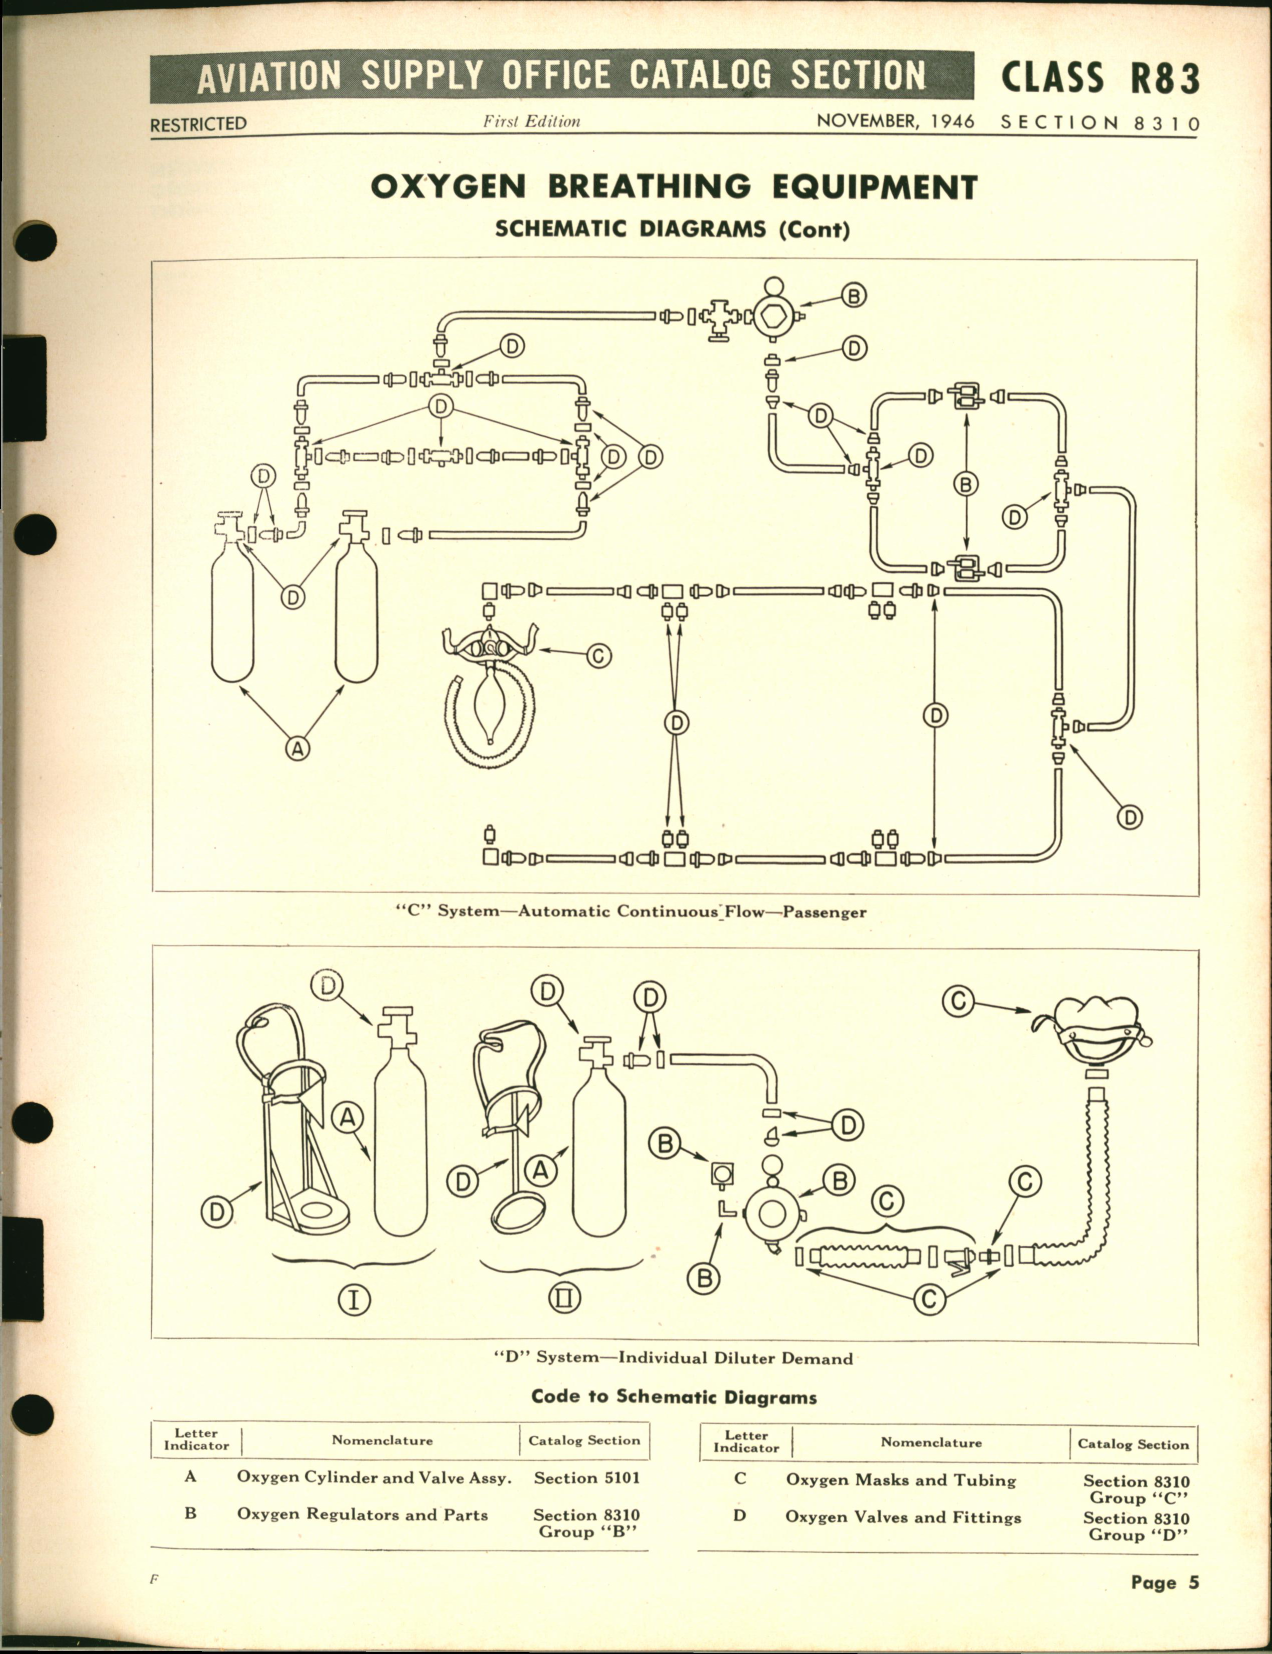 Sample page 5 from AirCorps Library document: Application, Regulators, Masks and Hoses, Valves, Fittings and Carriers